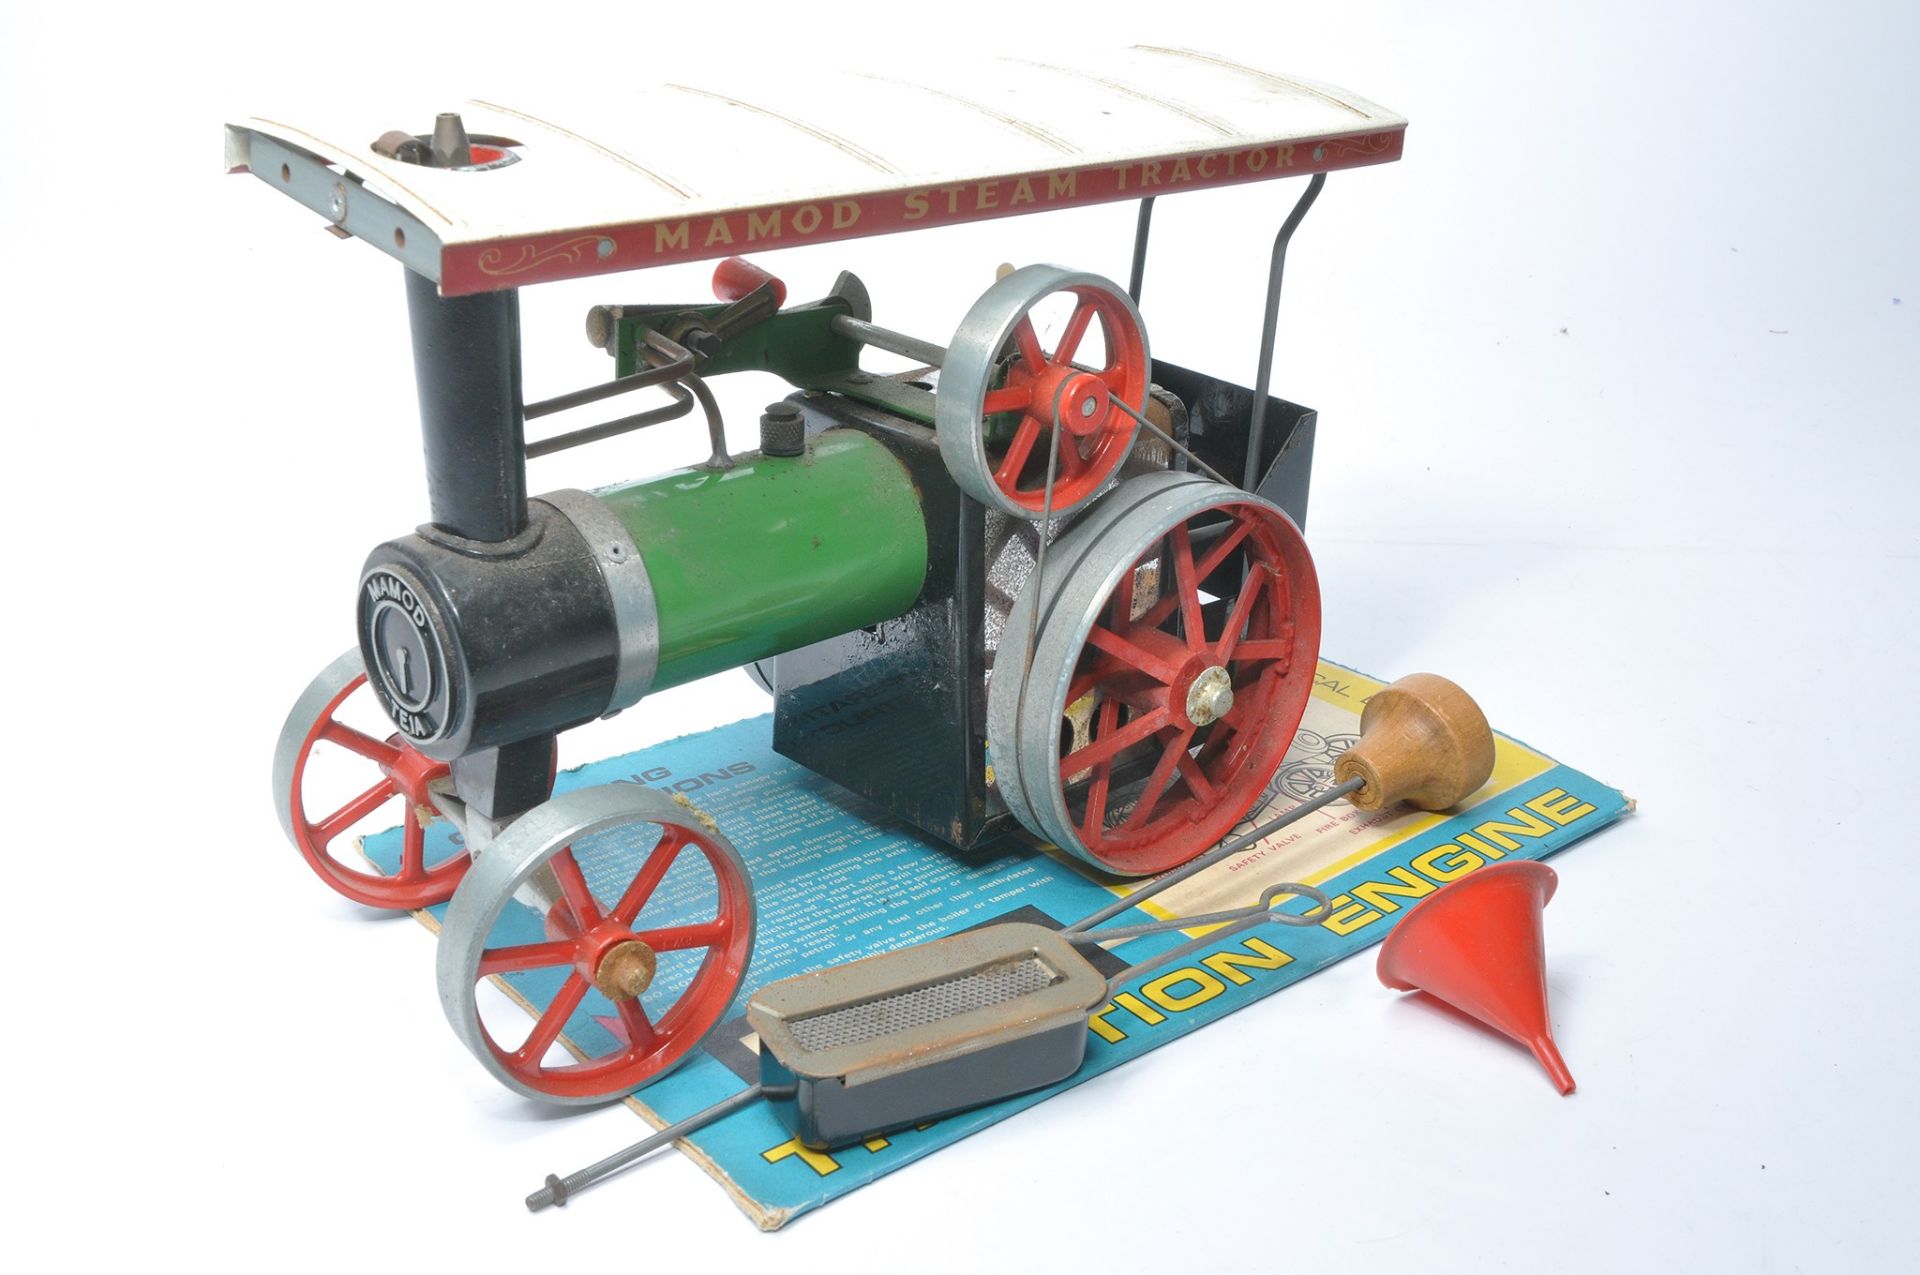 Mamod Live Steam Traction Engine as shown, with signs of use but generally displays good with